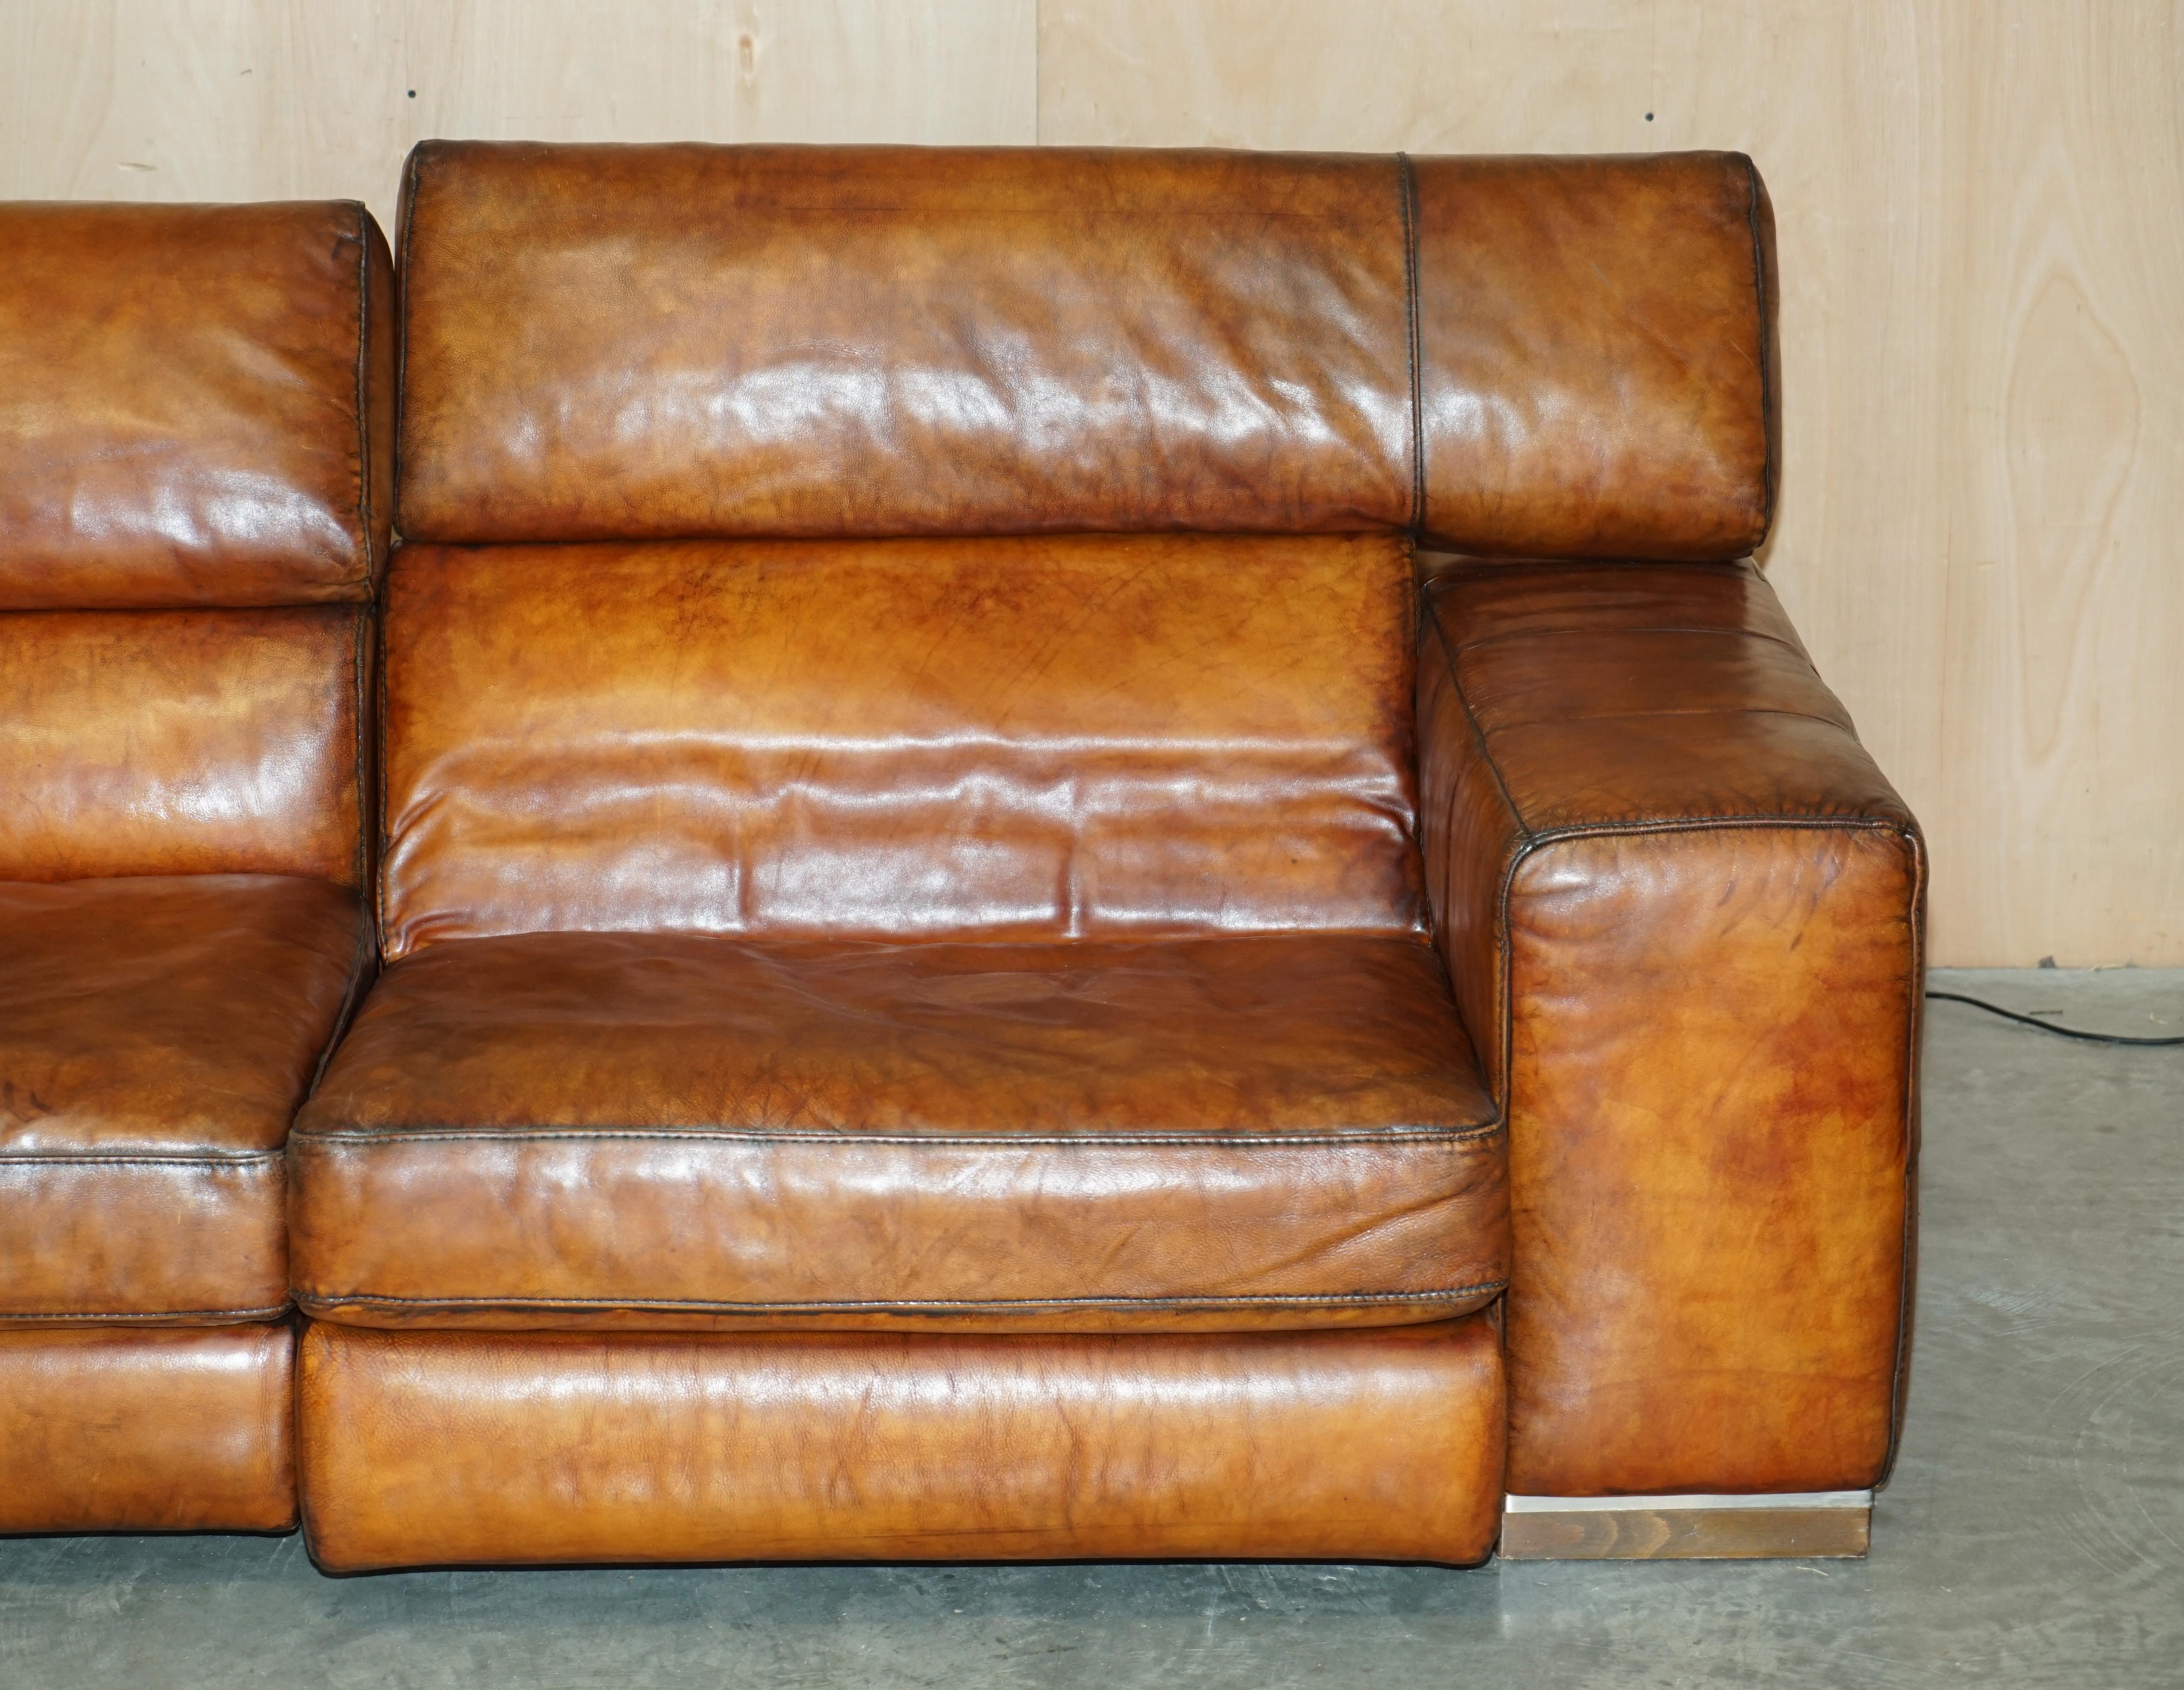 Natuzzi Roma Cigar Brown Leather Sofa Electric Raising Headrest Part of a Suite For Sale 9